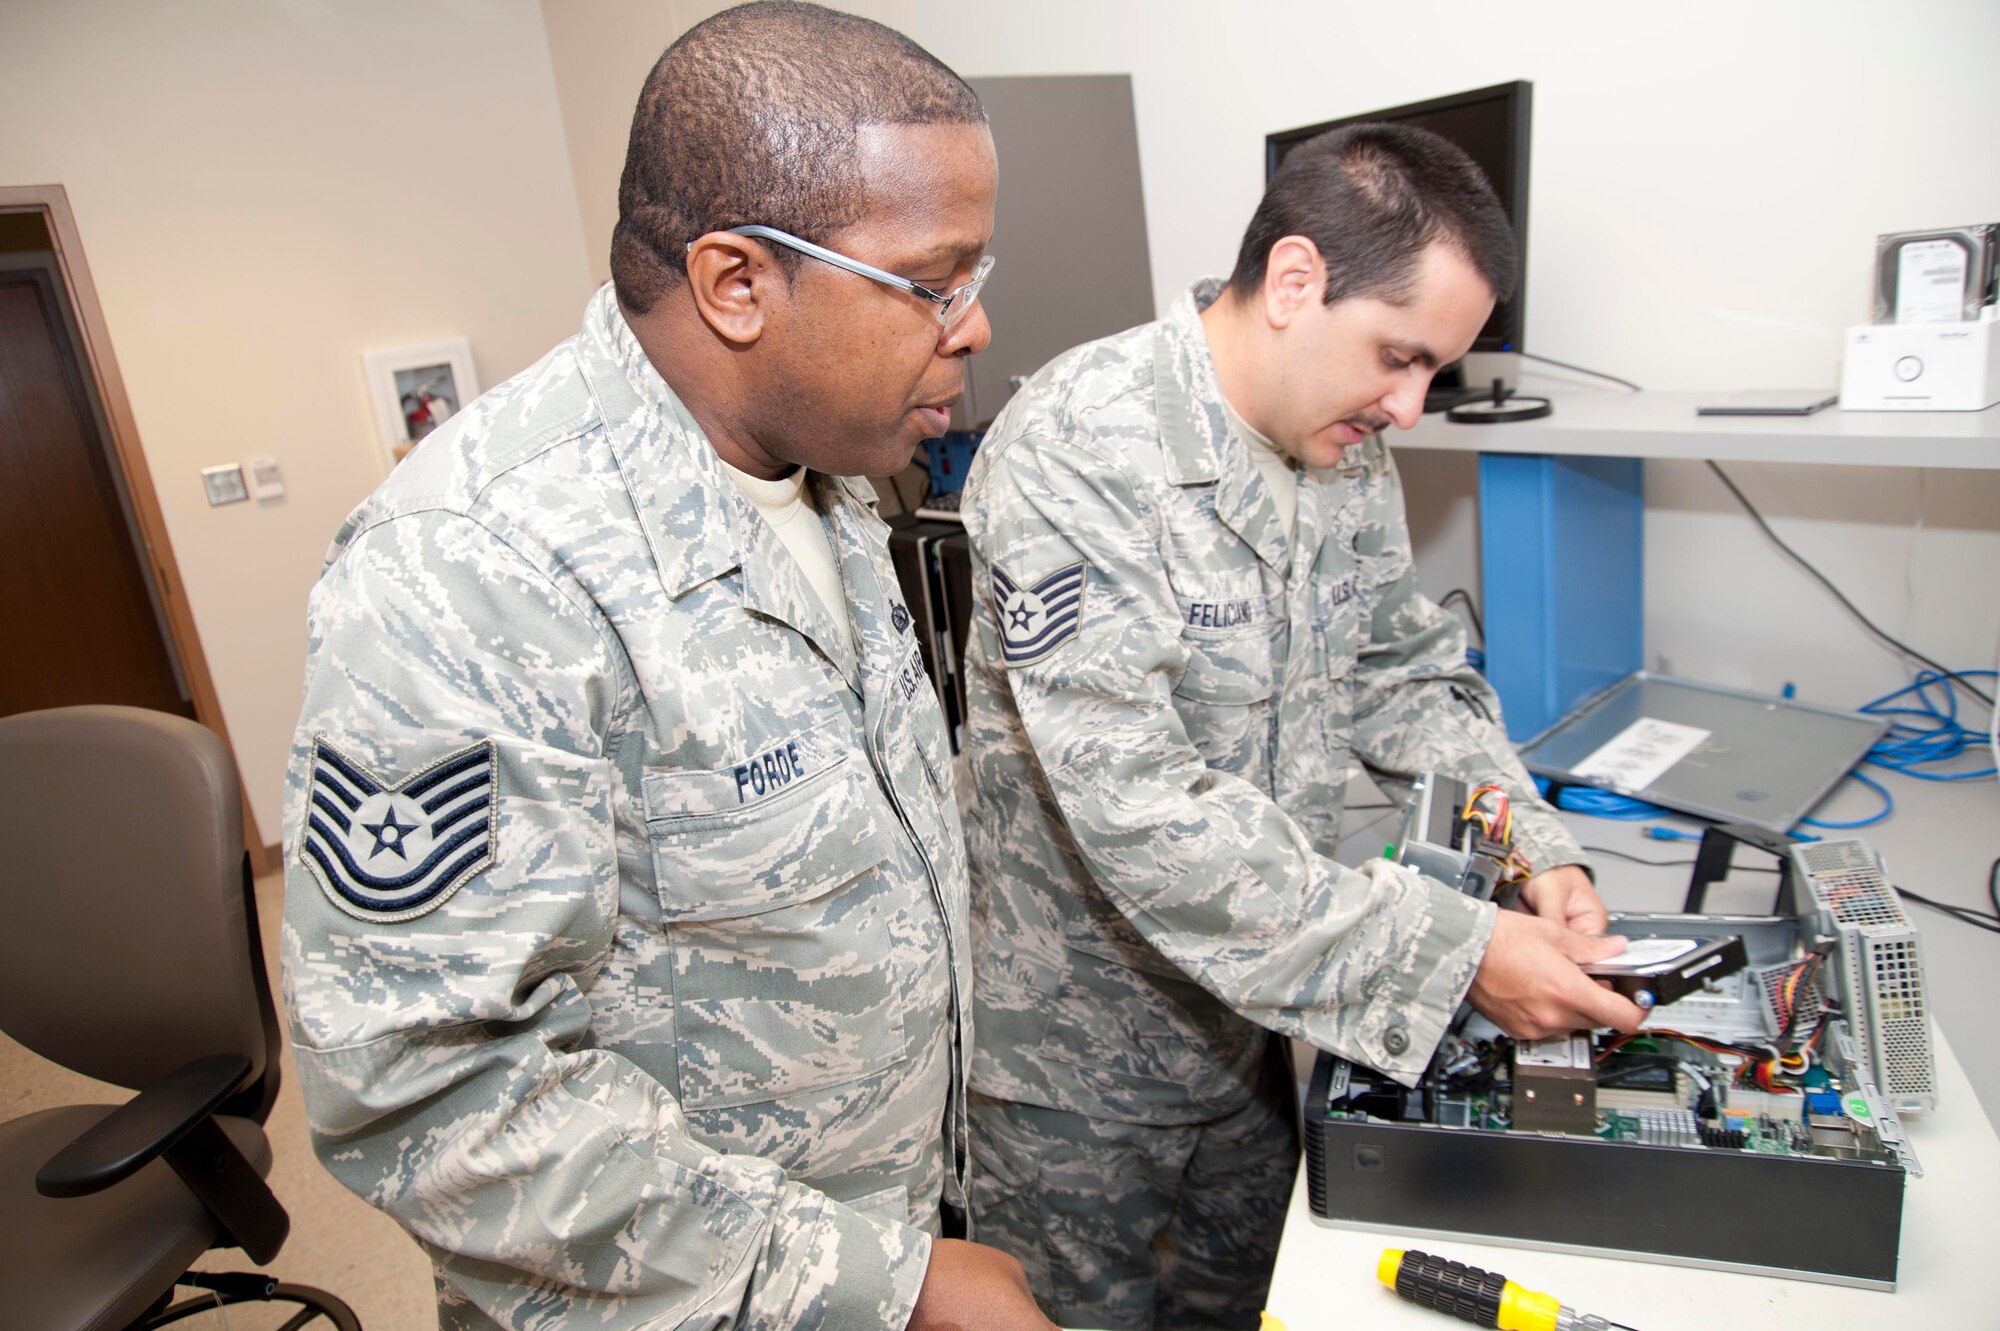 Tech. Sgts. Vernon Forde (left) and Steven Feliciano, 403rd Communications Flight cyber systems operators, service a wing computer in the Network Training Work Center. Members from various communications career field use the lab to hone their computer networking and routing skills. (U.S. Air Force photo by Tech. Sgt. Ryan Labadens)